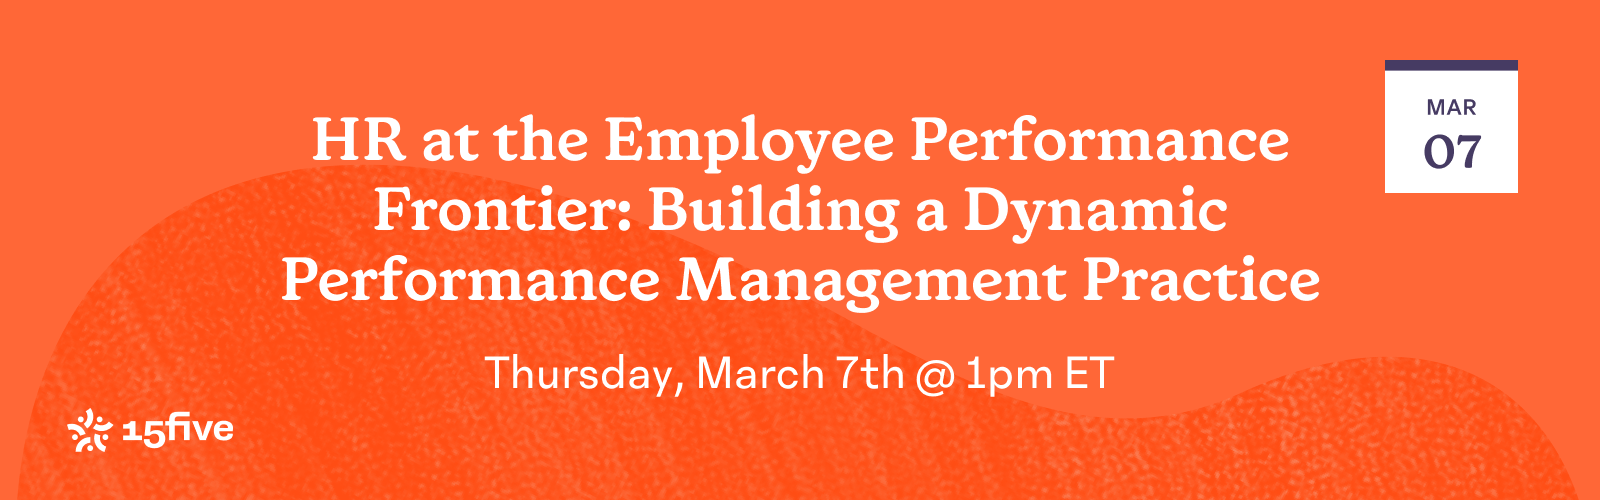 HR at the Employee Performance Frontier: Building a Dynamic Performance Management Practice | Thursday, March 7 @1 pm ET